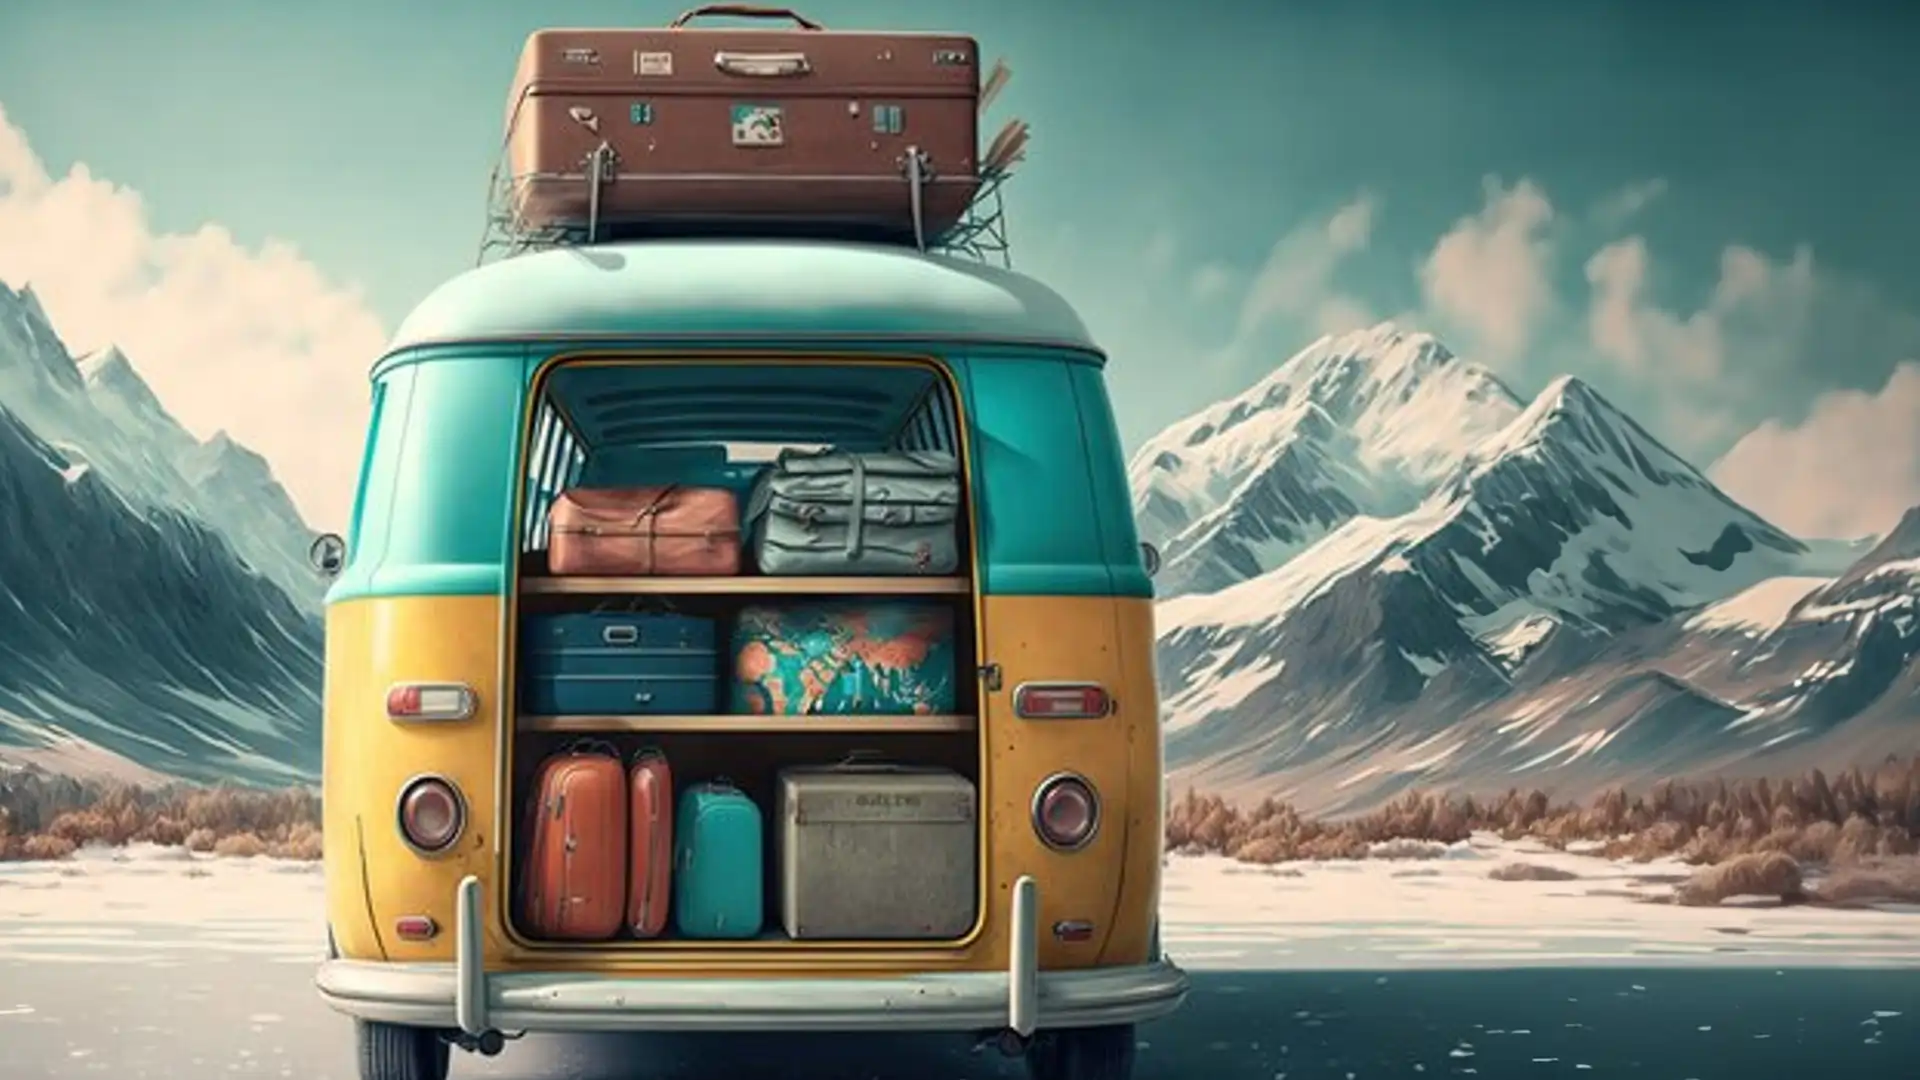 Illustration of a van full of family travel luggage on it with winter snow mountain as background.